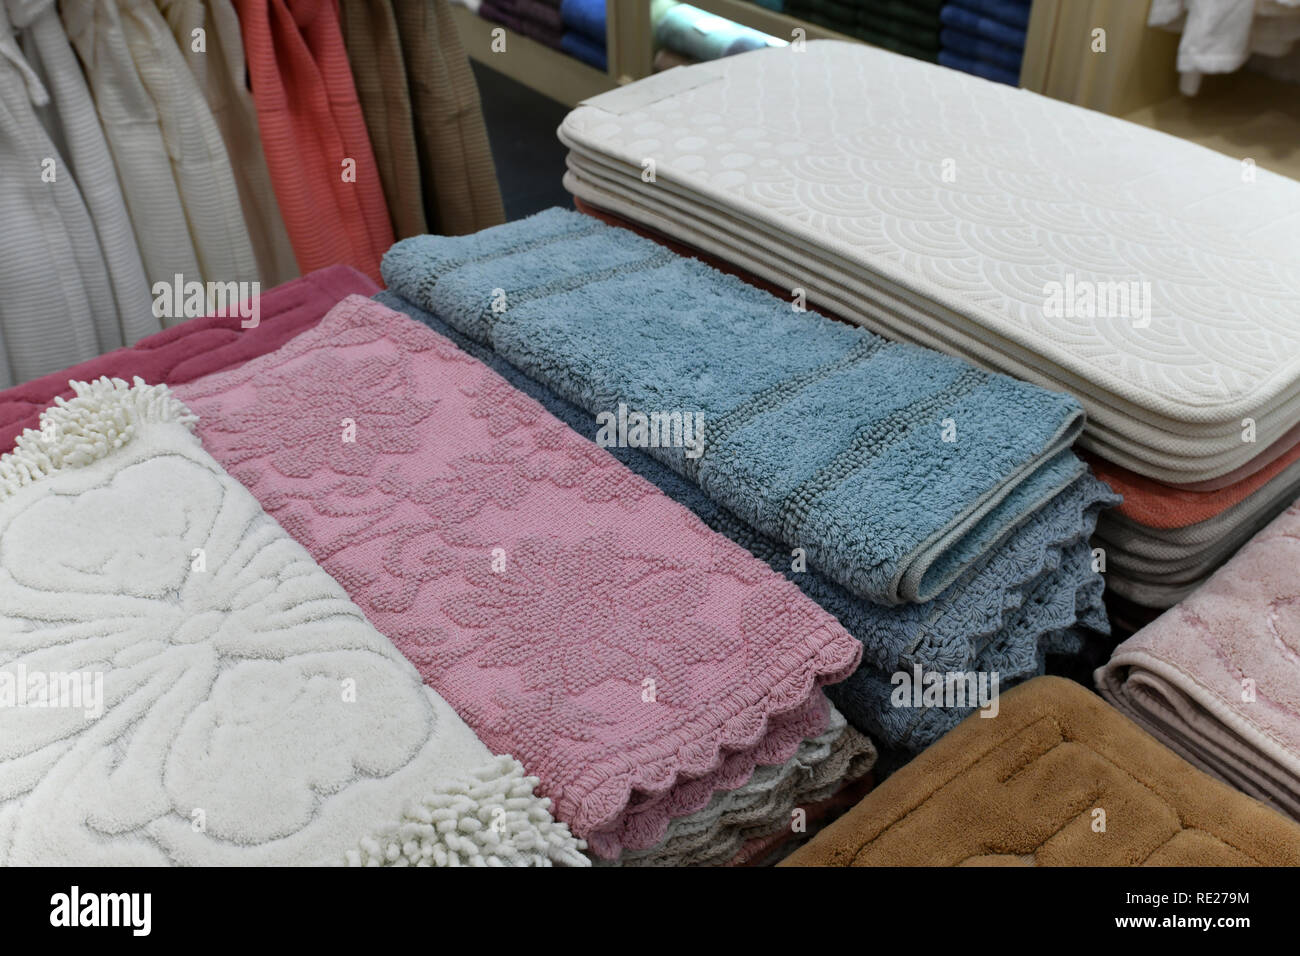 The Different bath mats in the store Stock Photo